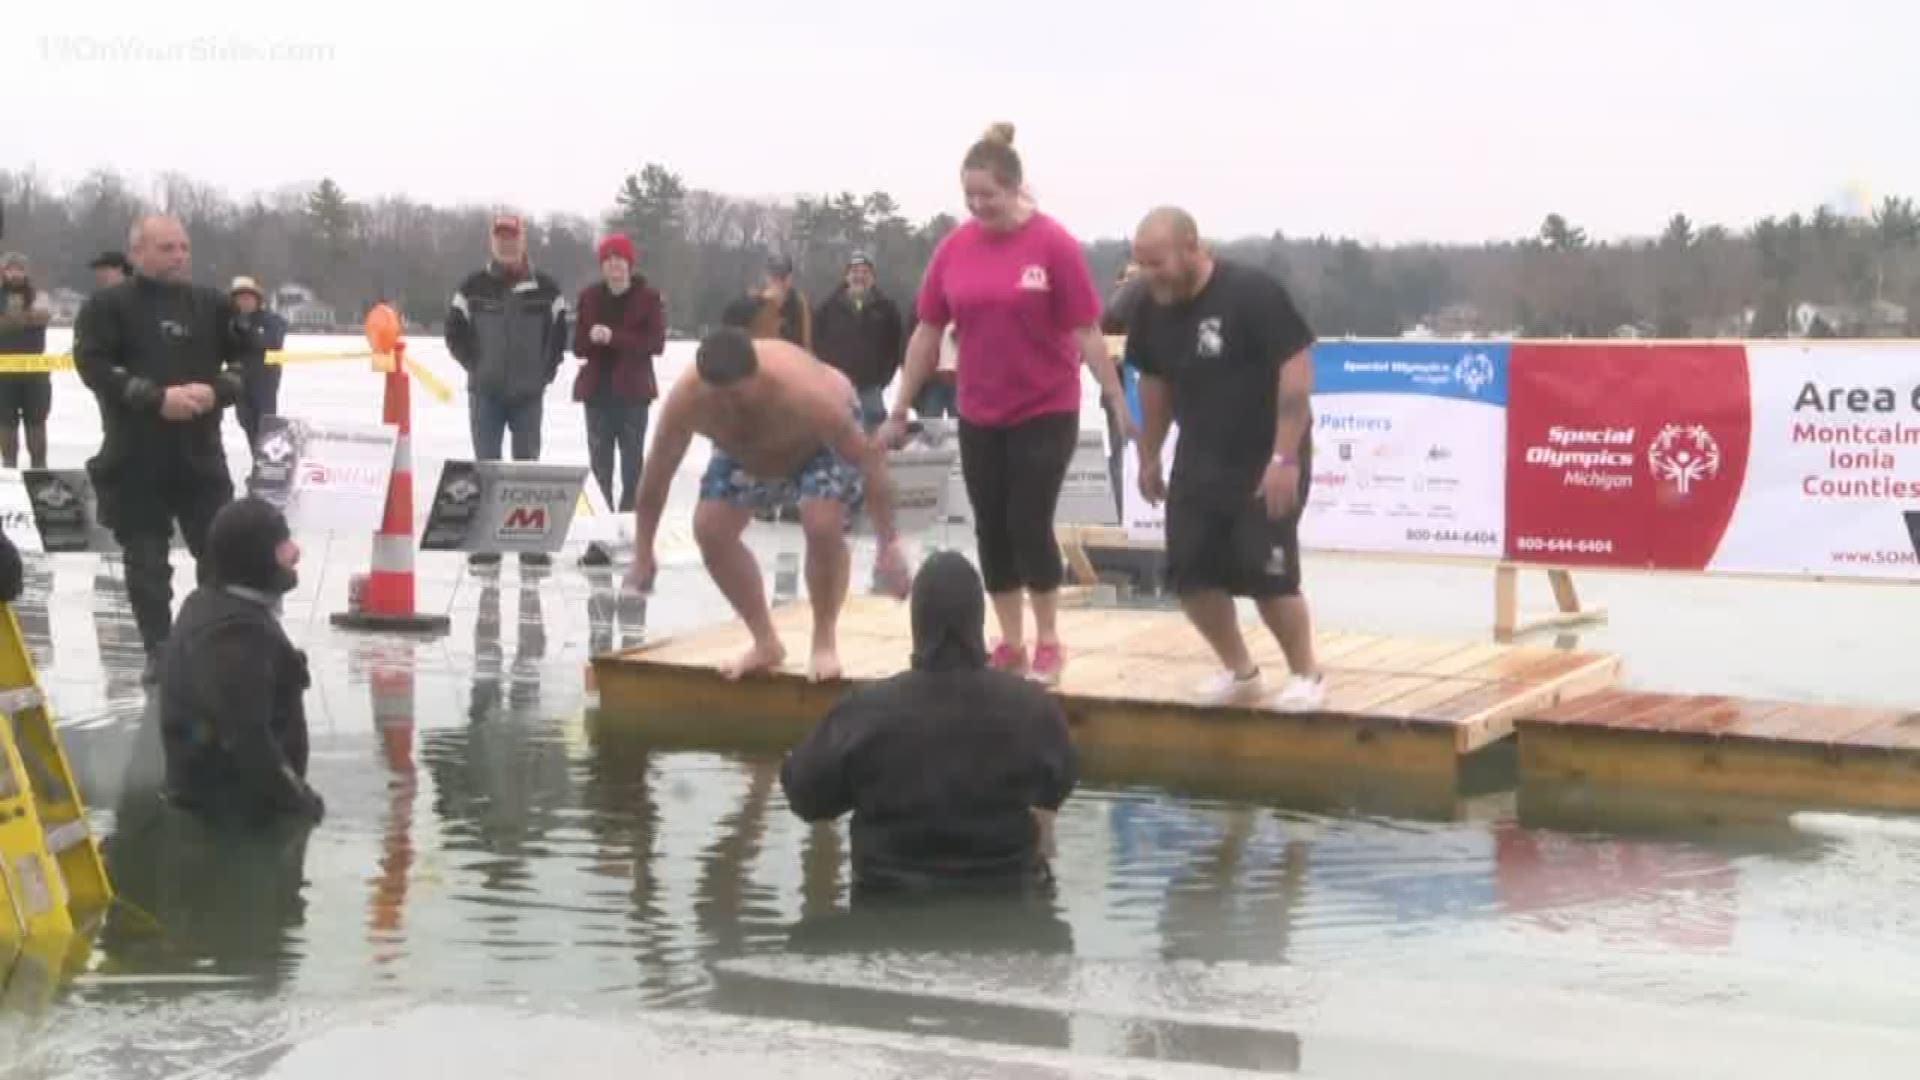 Frigid water and funds for a good cause, that's what you get with the Polar Plunge.